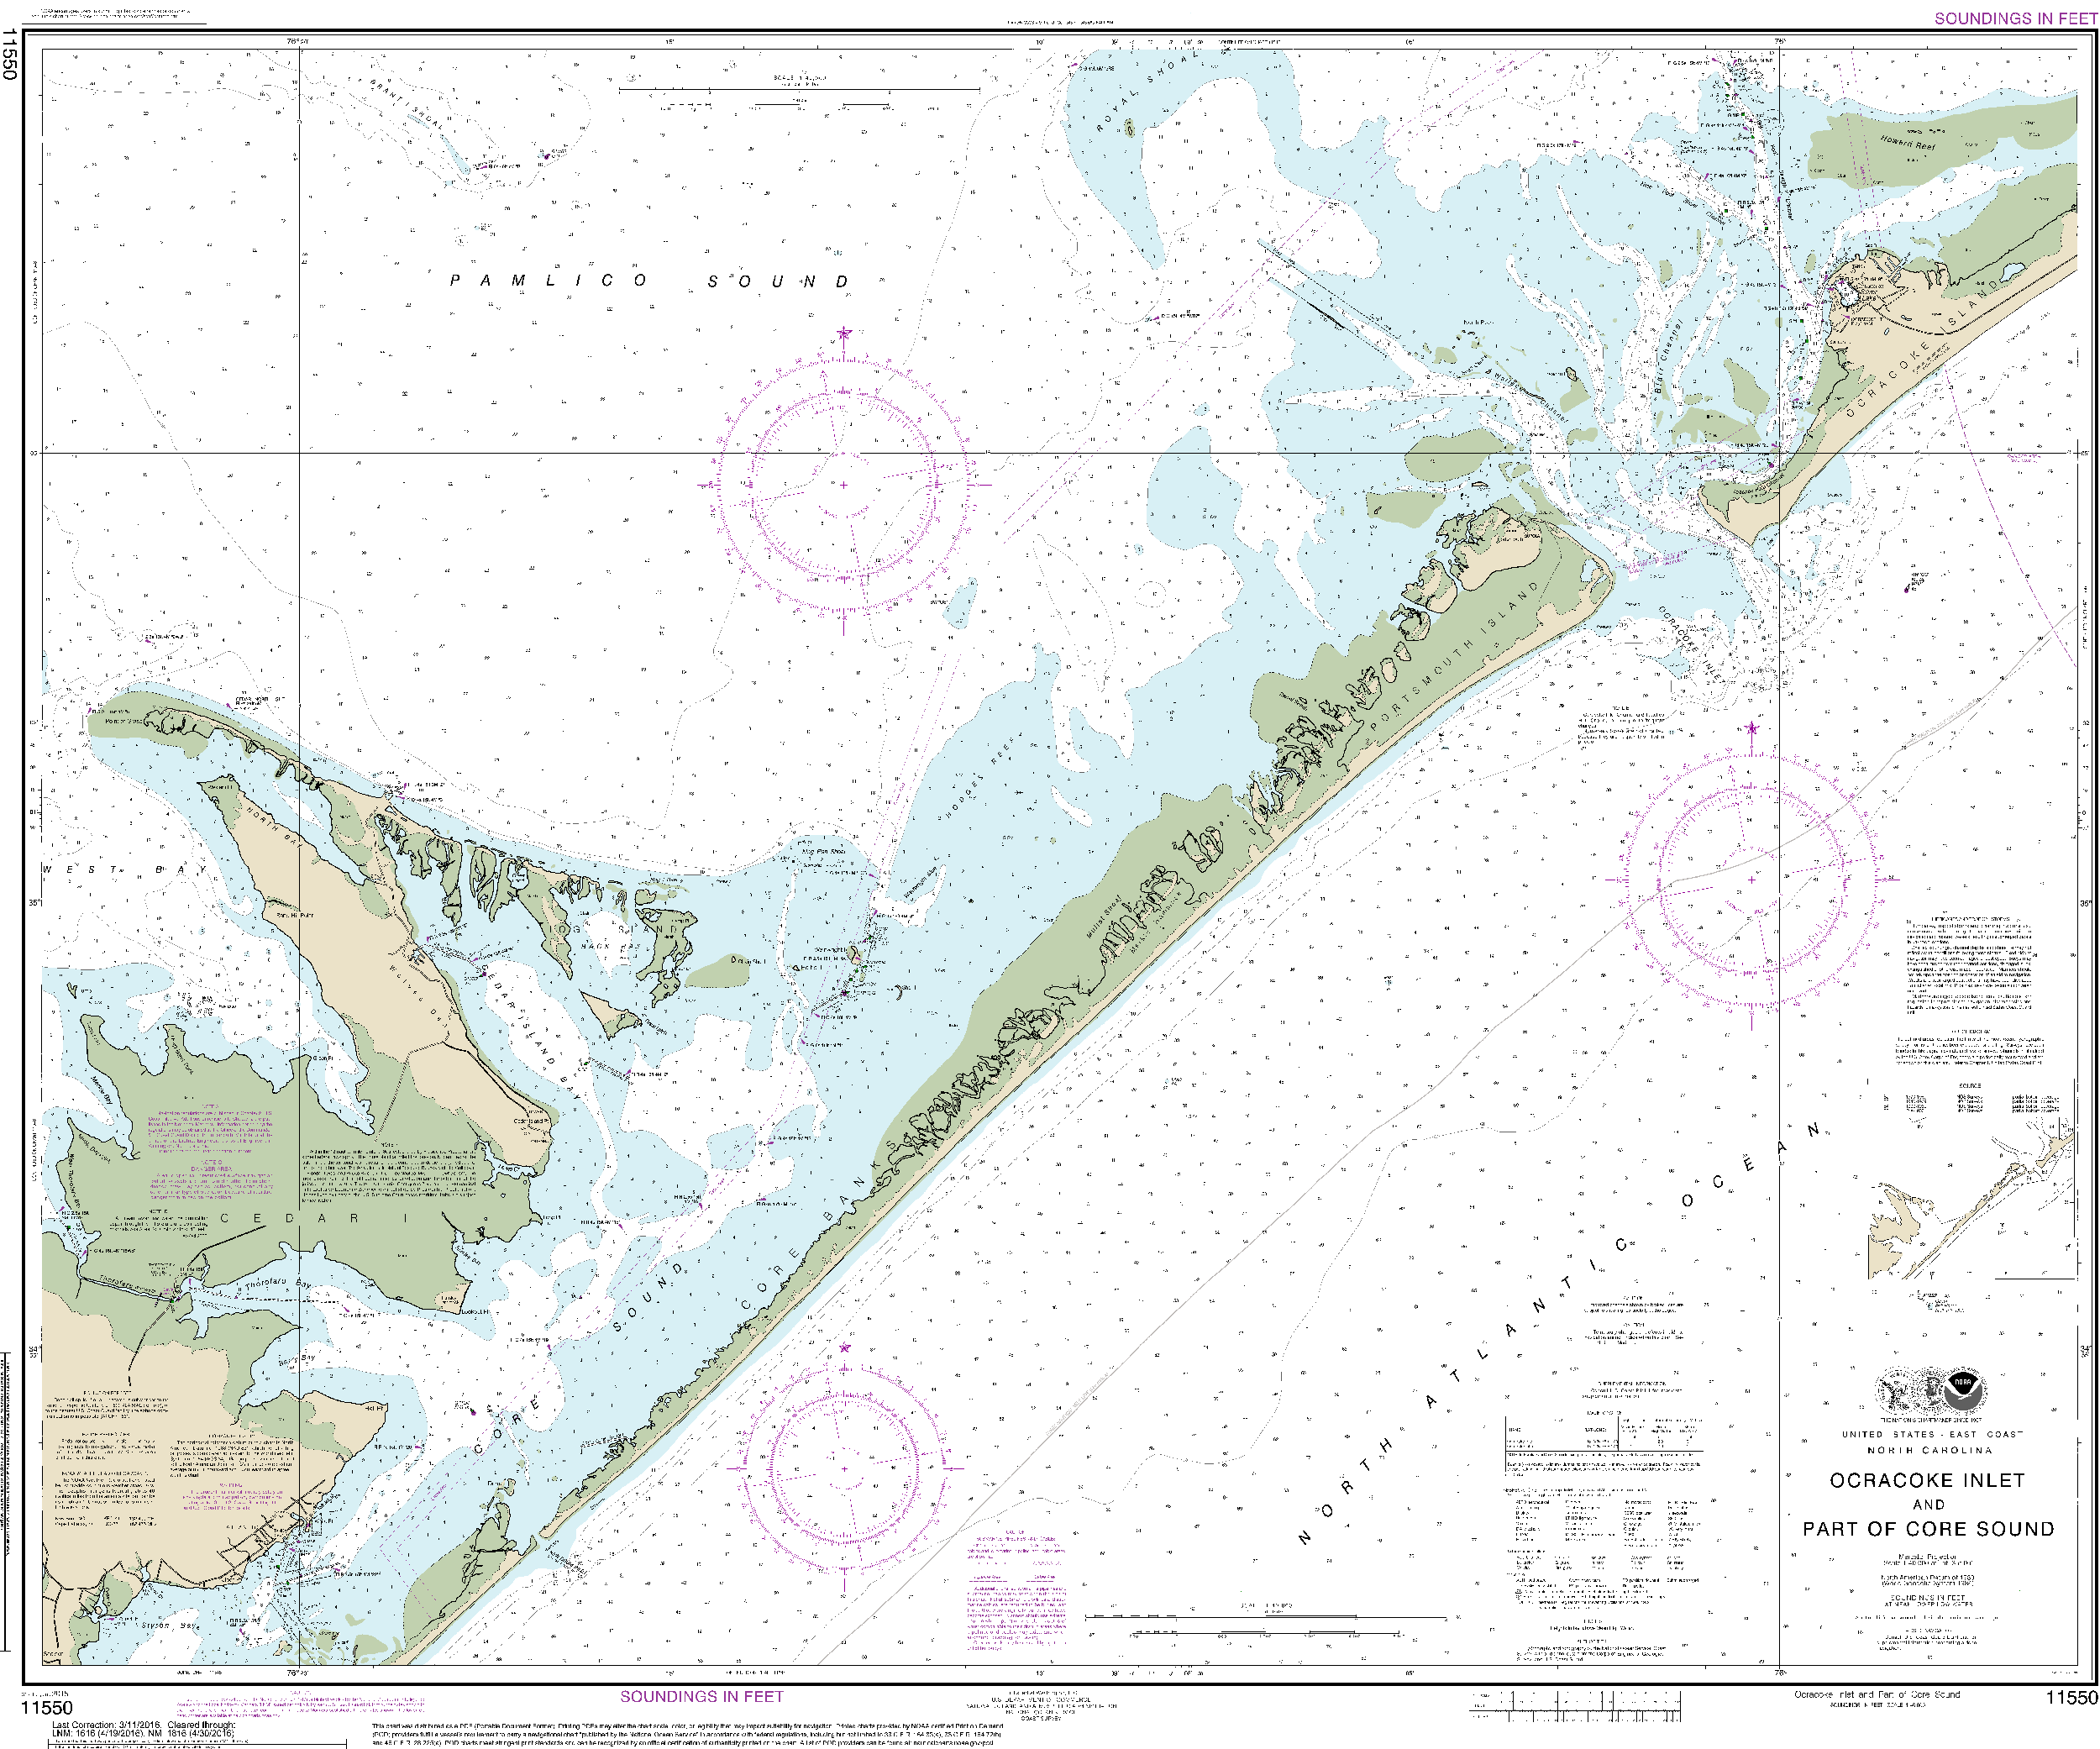 NOAA Nautical Chart 11550: Ocracoke lnlet and Part of Core Sound